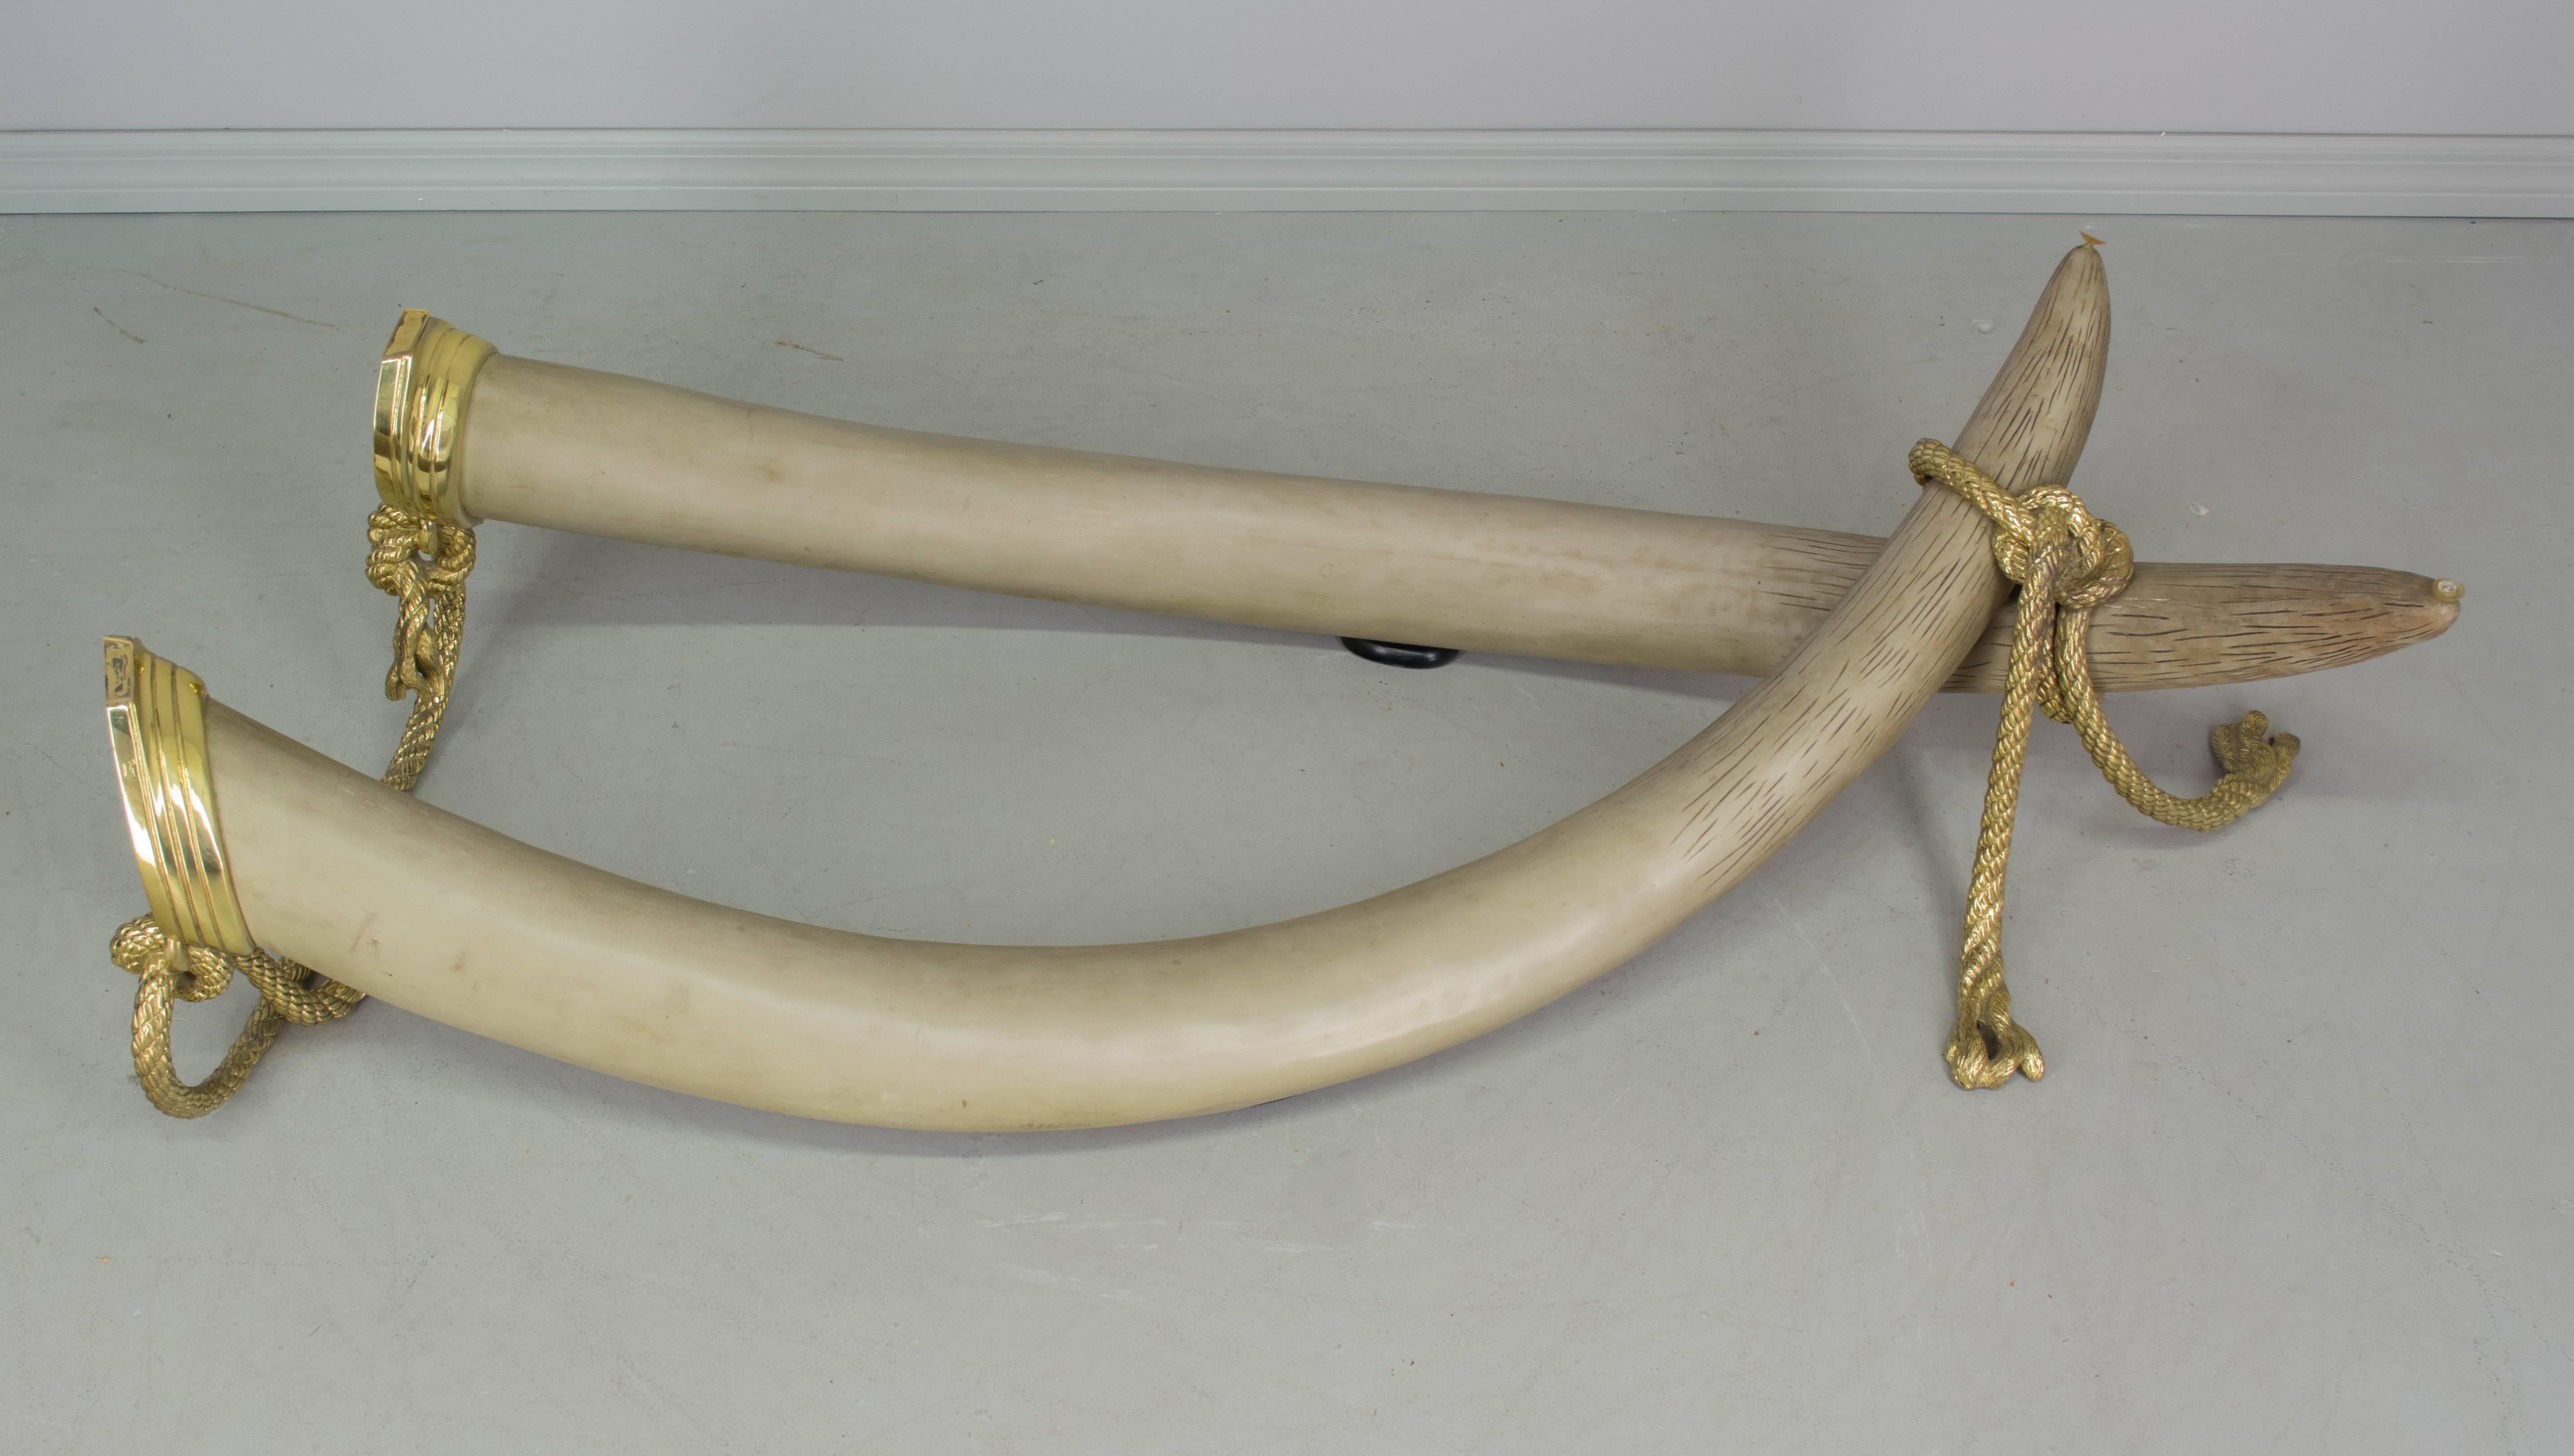 20th Century Monumental Faux Tusk Coffee Table, Signed Valenti